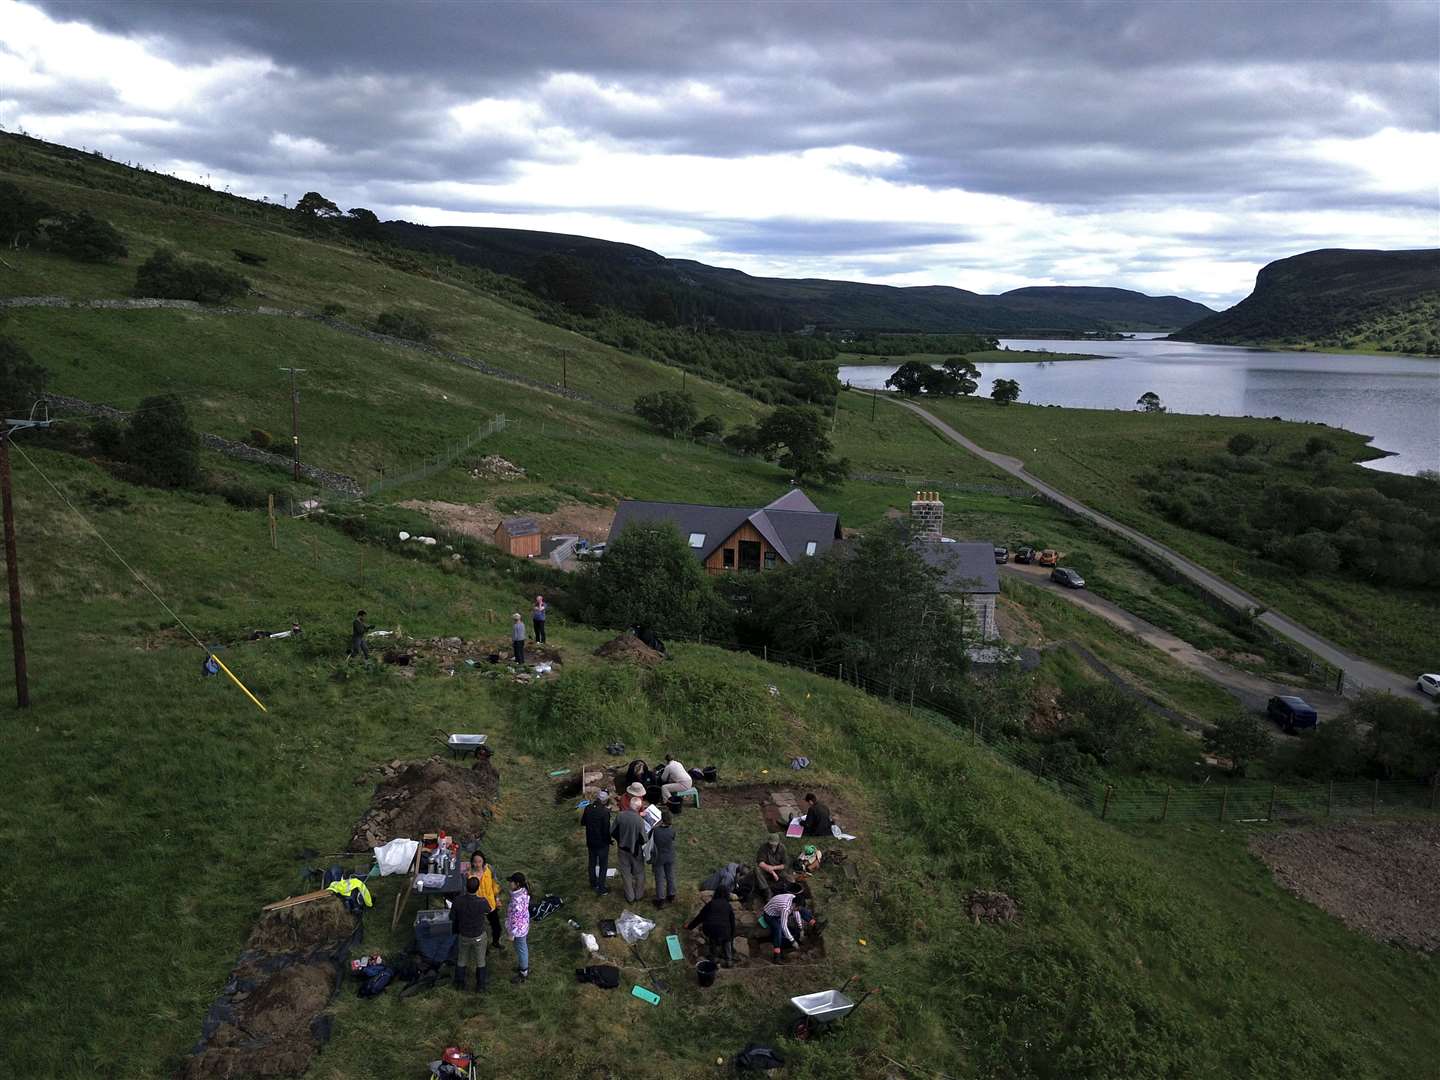 A drone view of the site at Strath Brora.